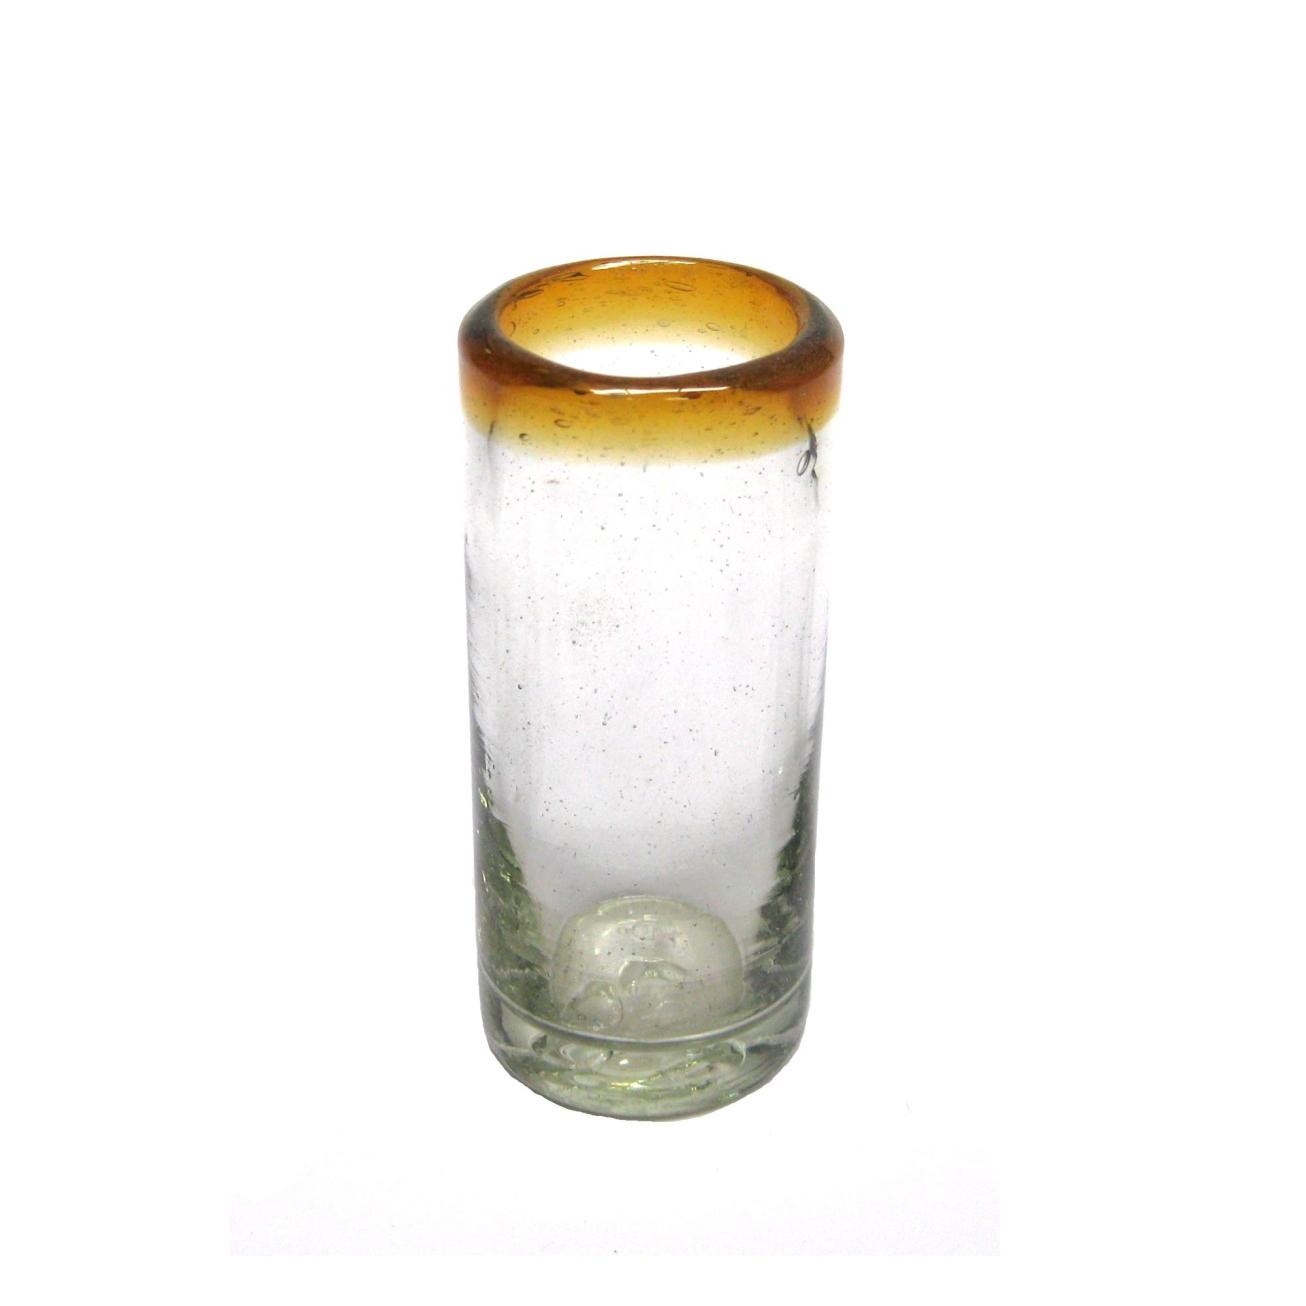 Wholesale Colored Rim Glassware / Amber Rim 2 oz Tequila Shot Glasses  / These shot glasses bordered in amber color are perfect for sipping your favourite tequila or any other liquor.